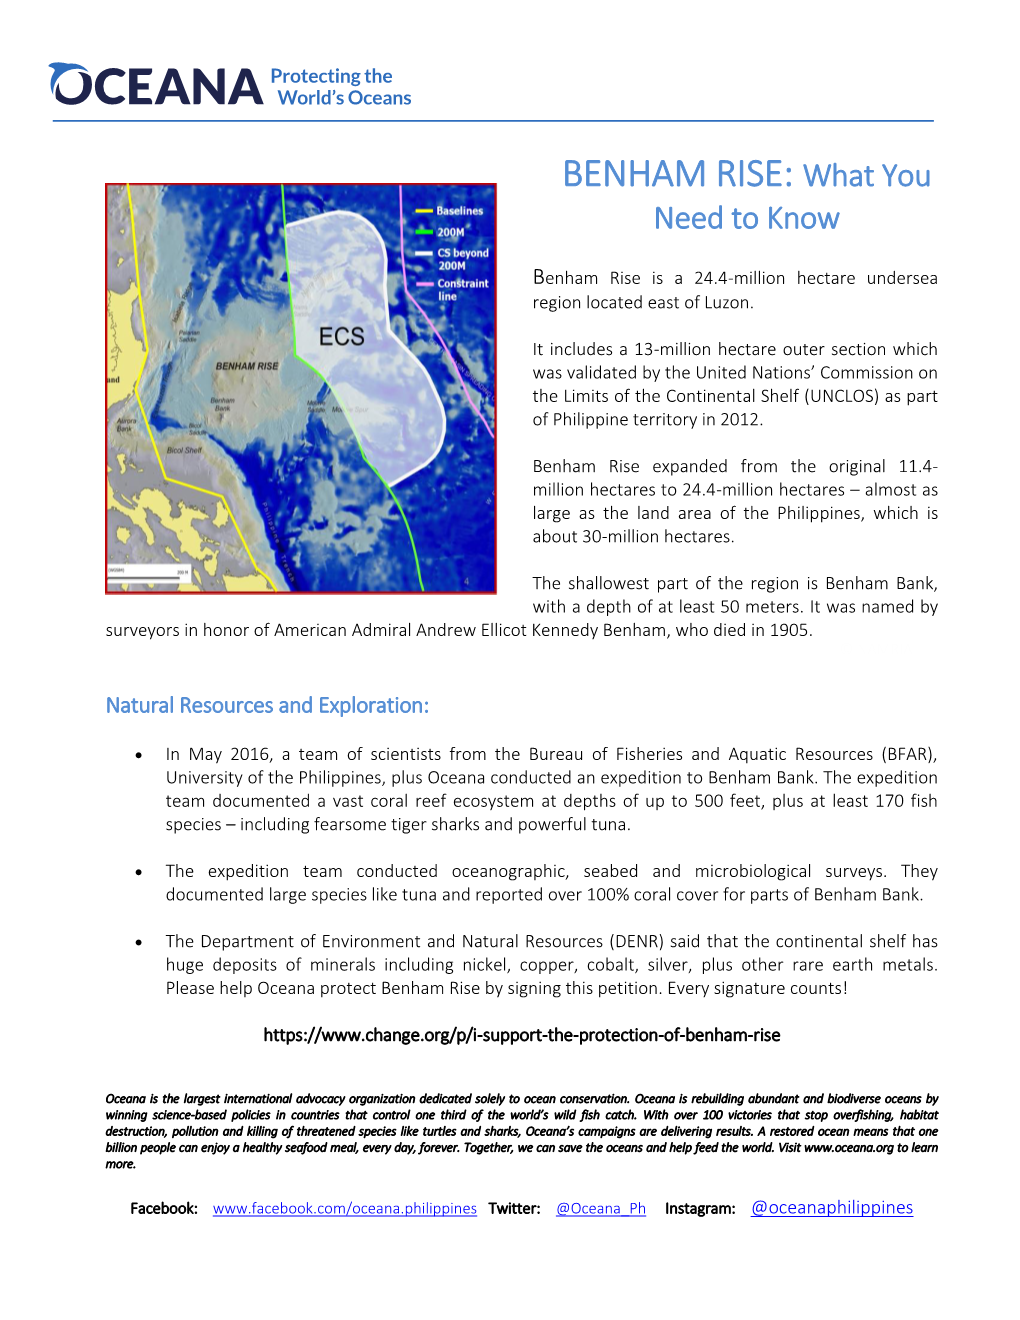 BENHAM RISE: What You Need to Know